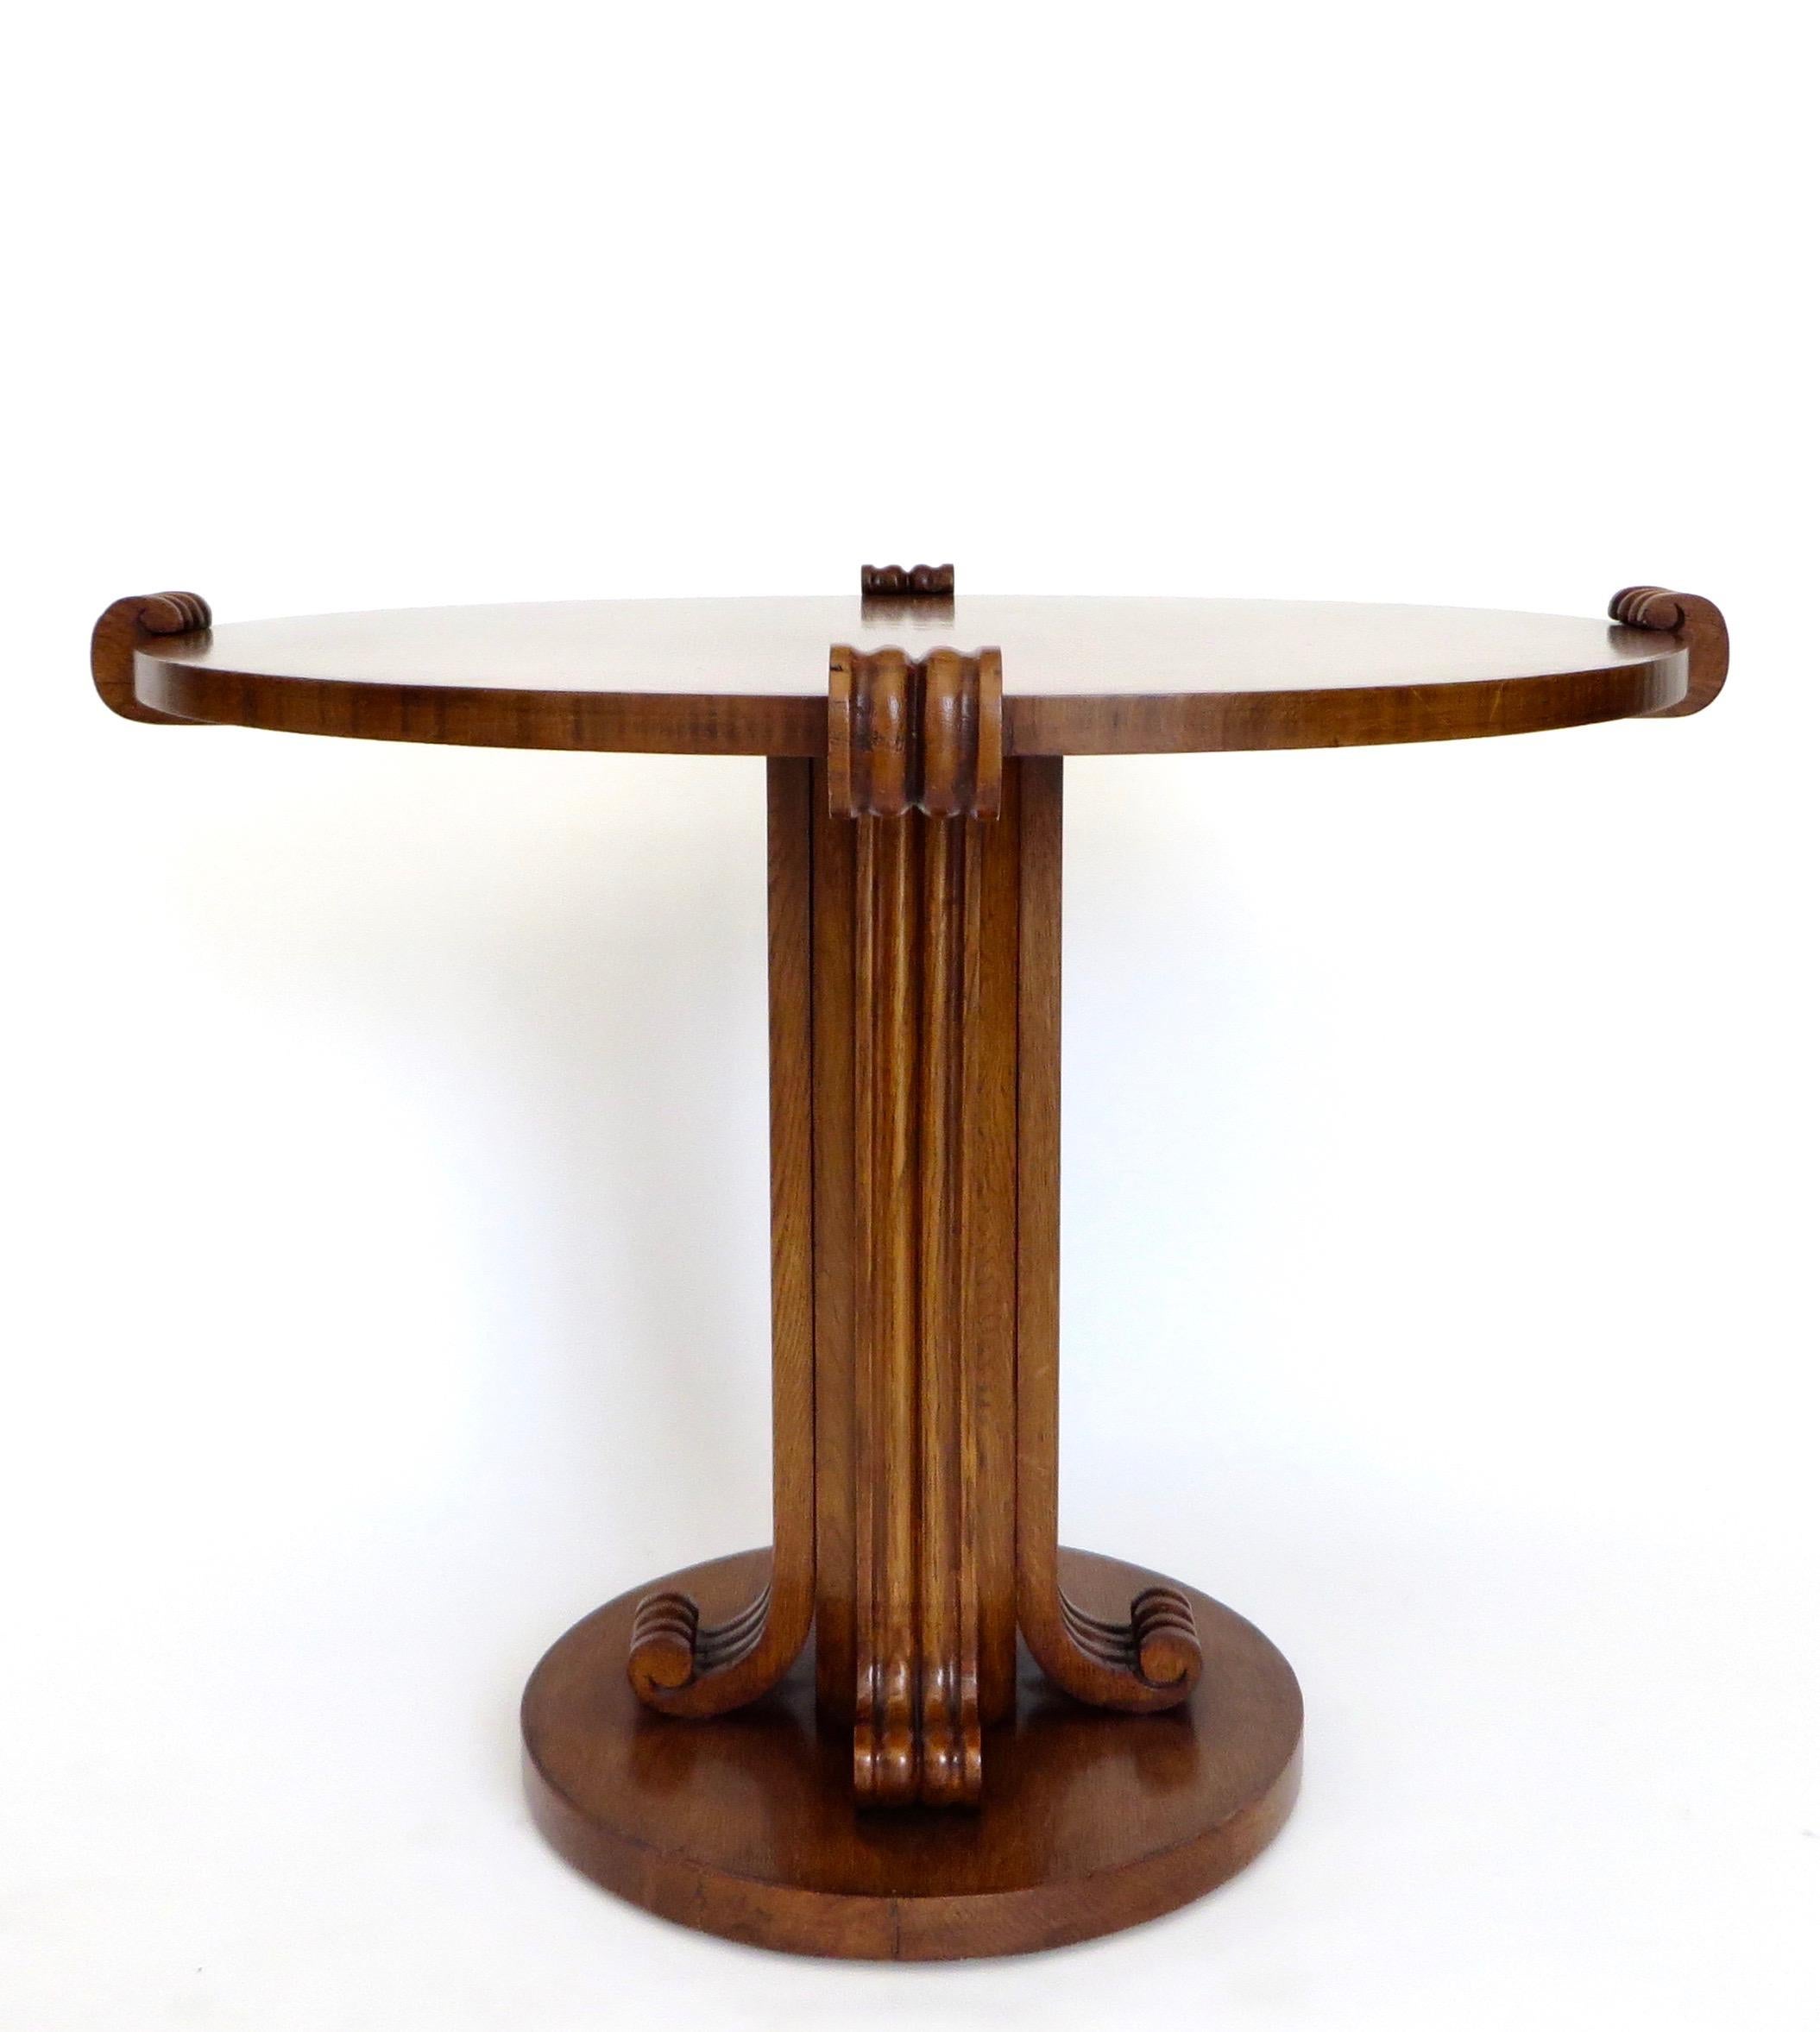 An icon of French 1940s design, this rare round small dining, side or centre table by Jean-Charles Moreux (1889-1956), has a round top and sculptural base having four heavily scrolled supporting arms. This is a rare iteration in handsome figurative